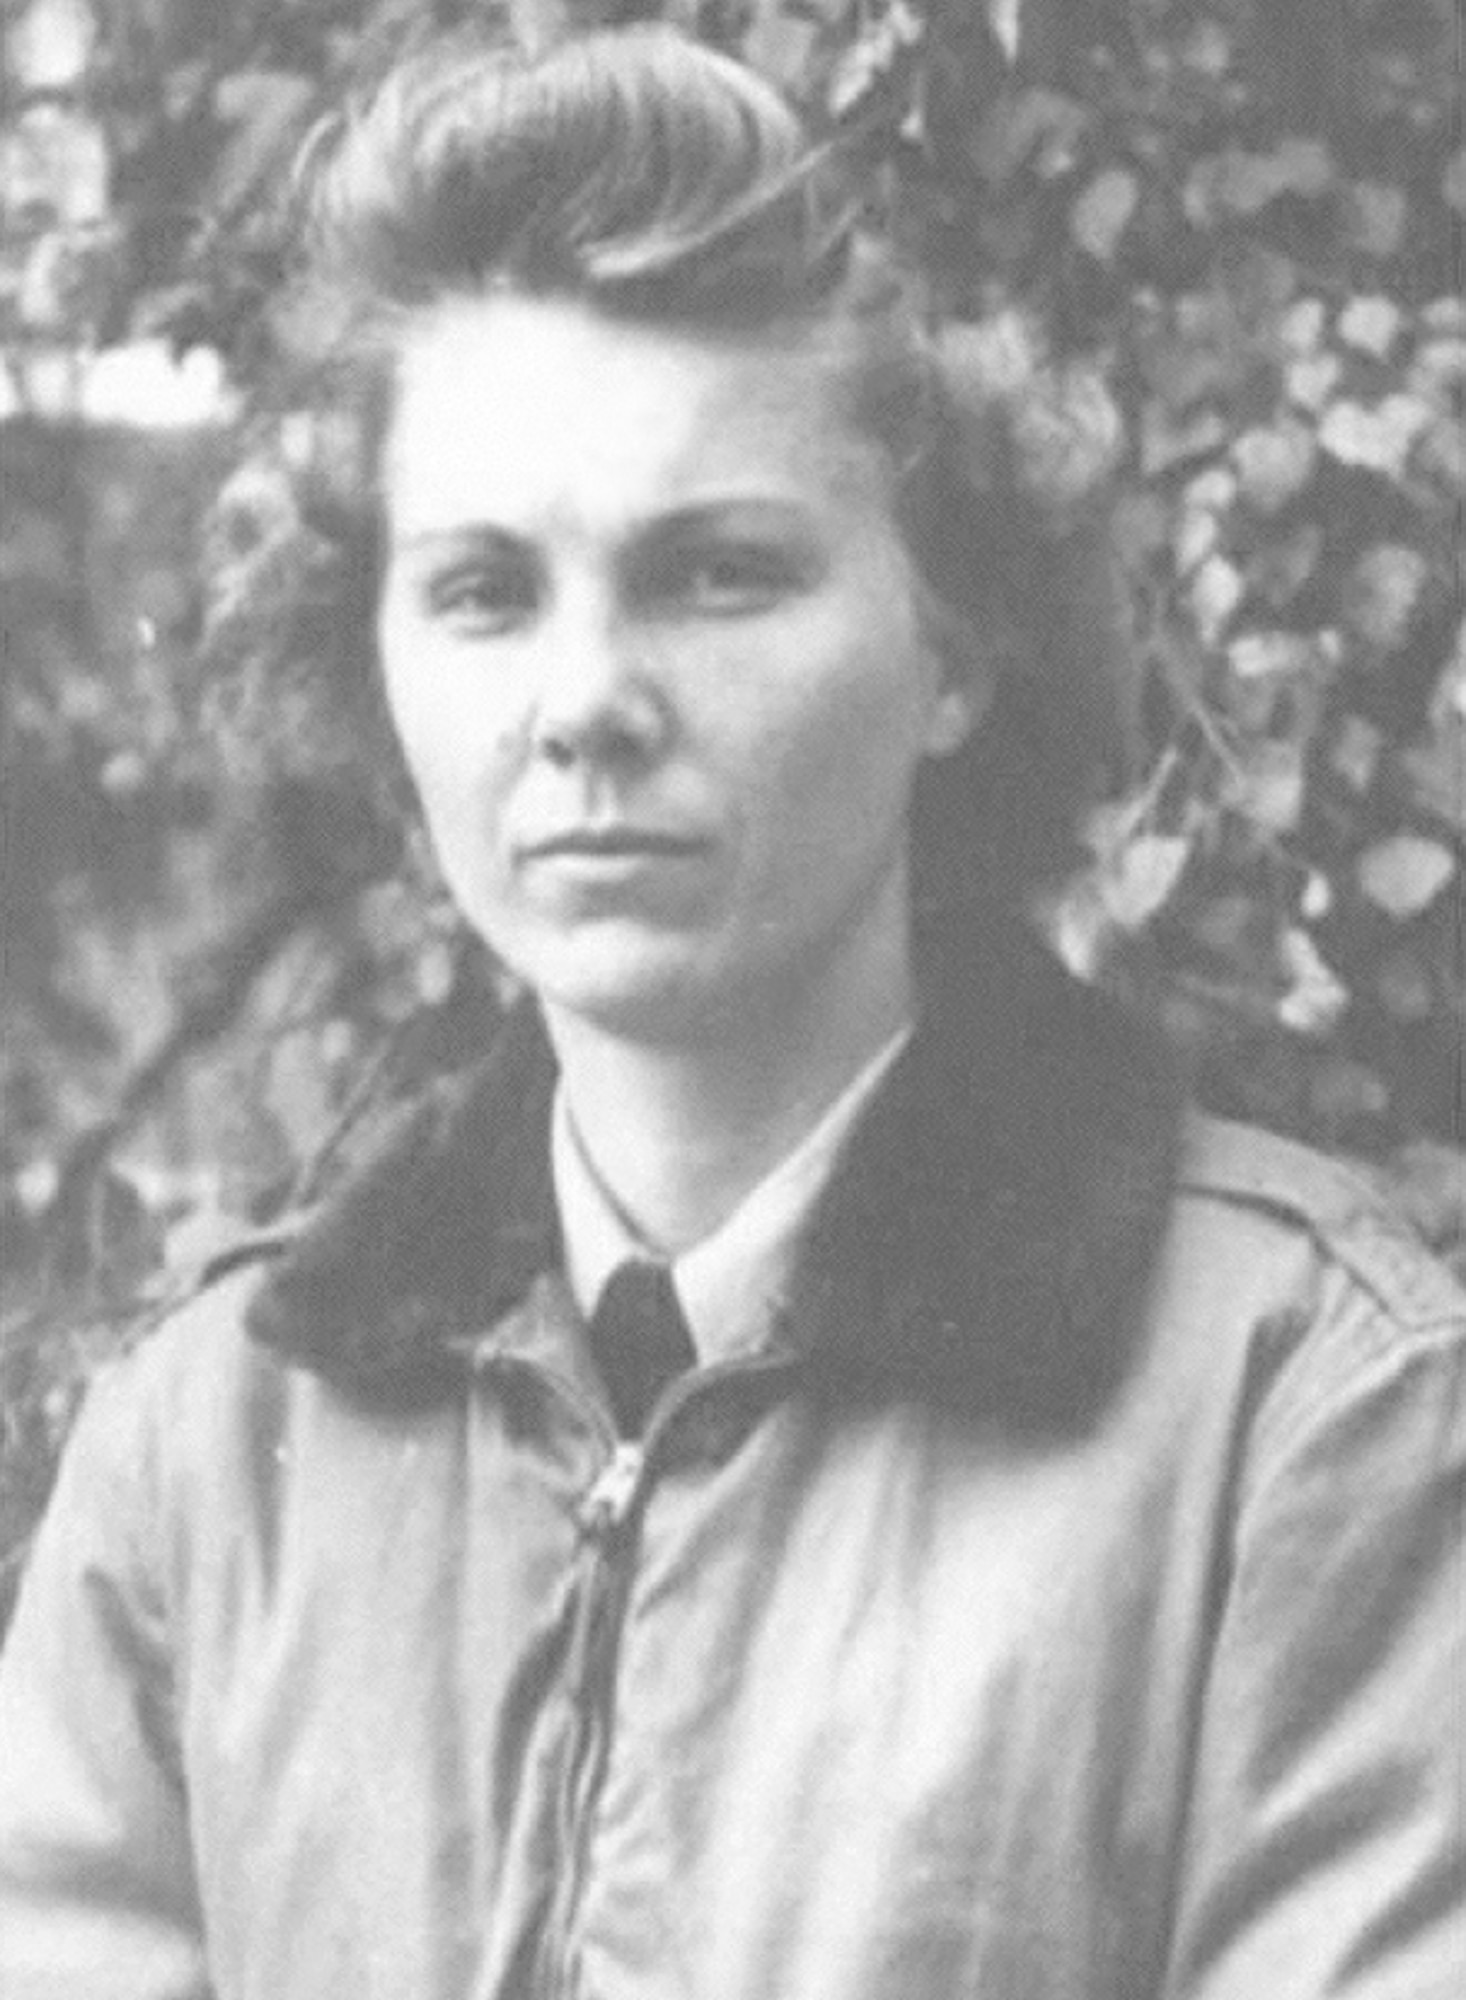 Lt. Reba Z. Whittle was an Air Force flight nurse who served during World War II. She became the only female U.S. military member held prisoner of war in the European Theater.  (Air Force photo)